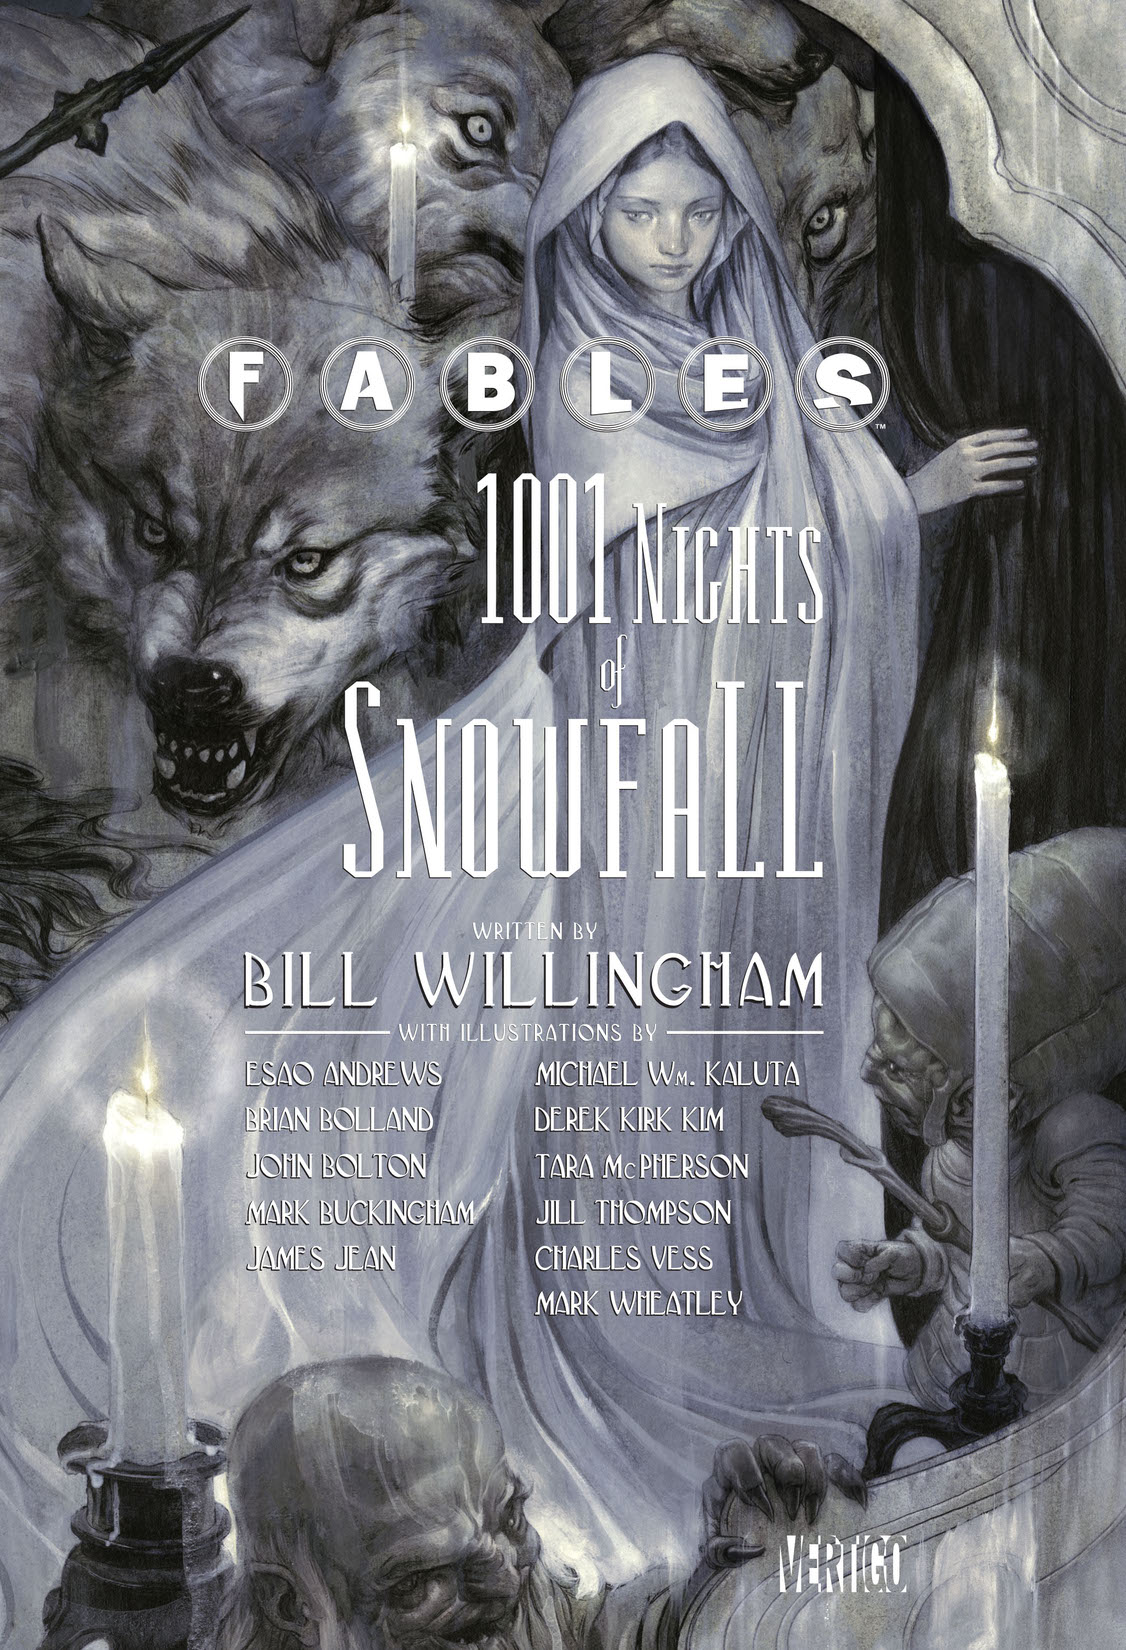 Fables: 1001 Nights of Snowfall preview images